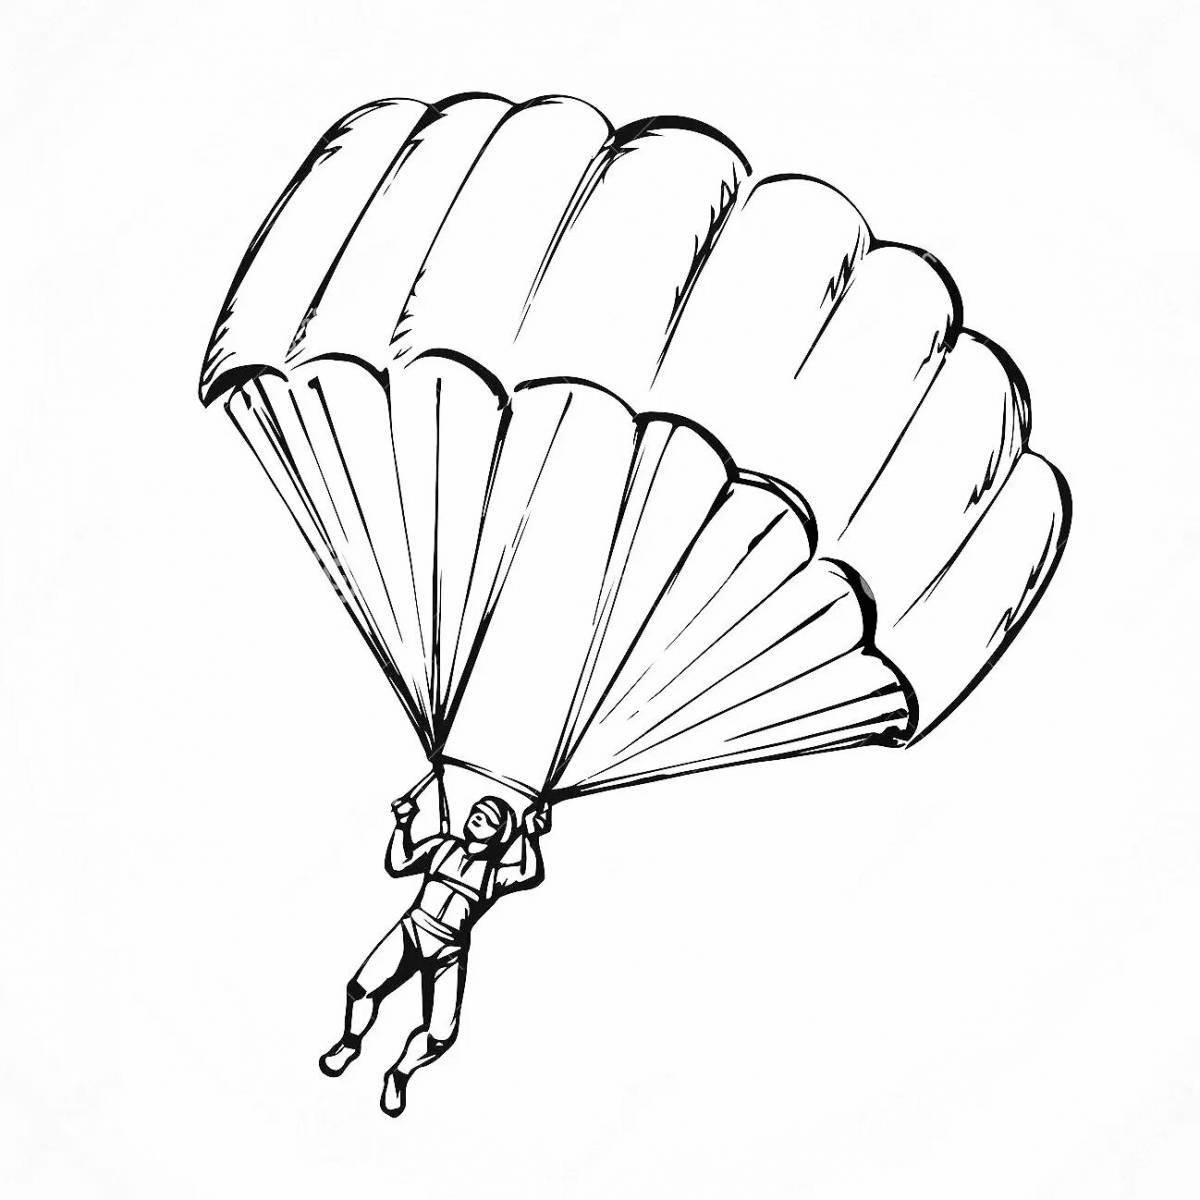 Adorable parachute coloring book for kids